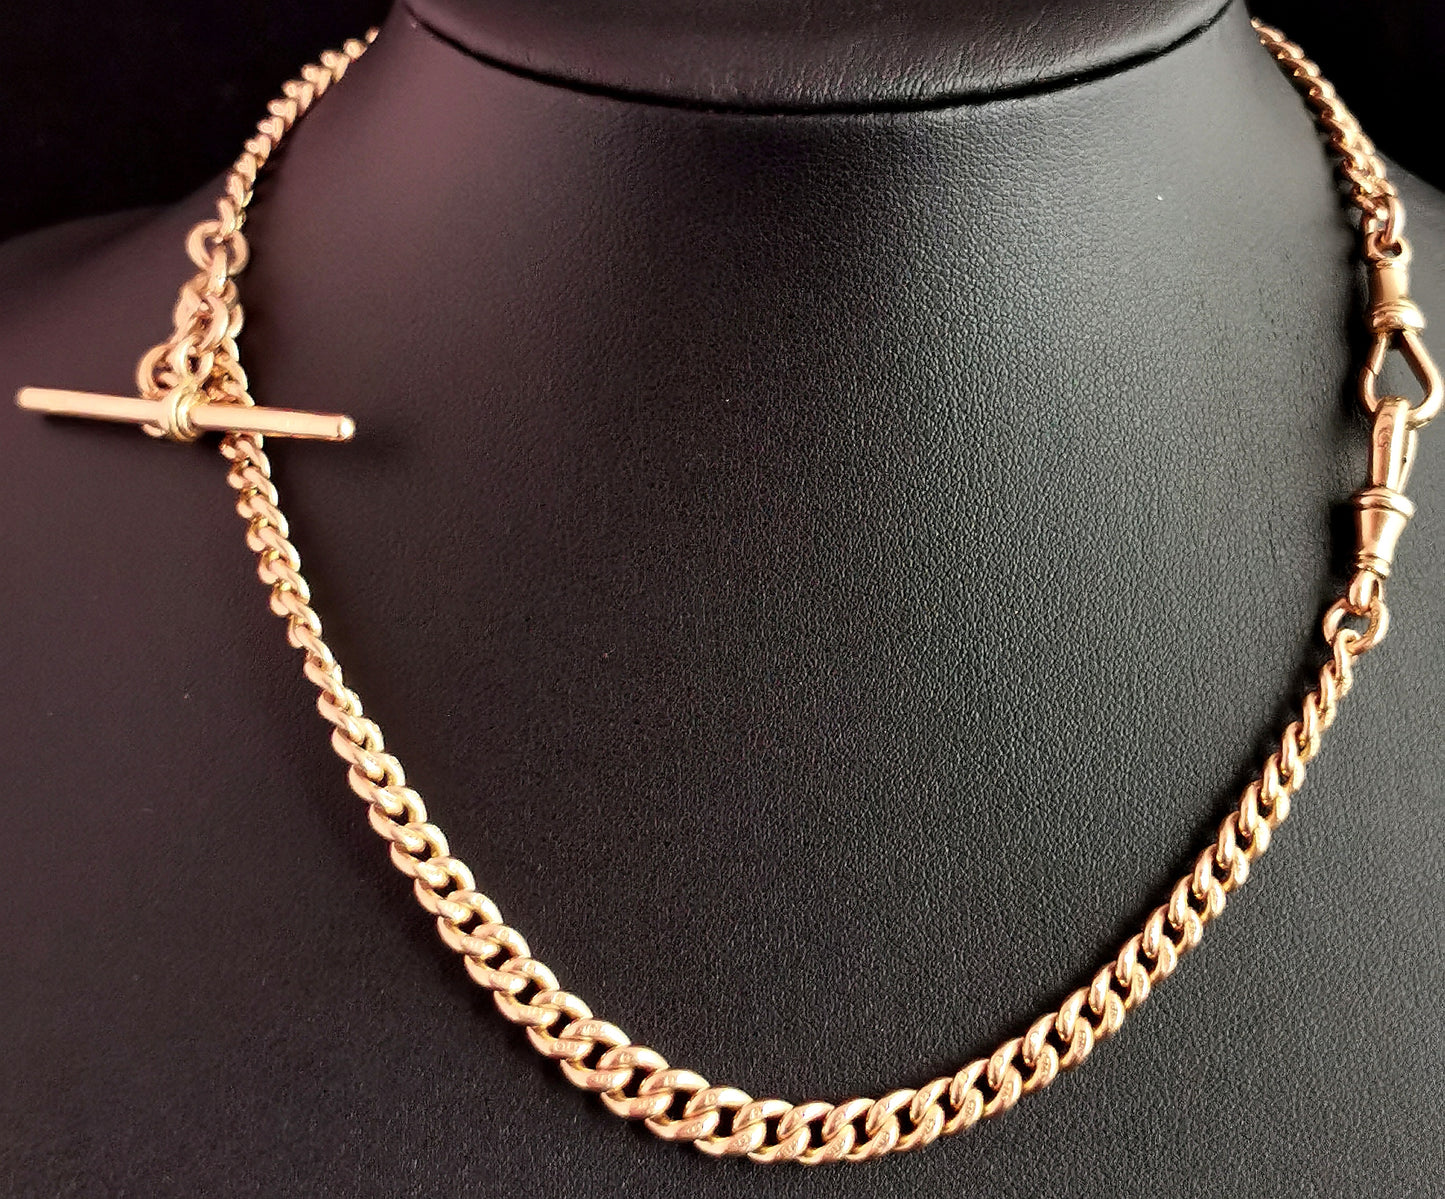 Reserved: Antique 9ct Rose gold Albert chain, curb link, watch chain necklace, Edwardian